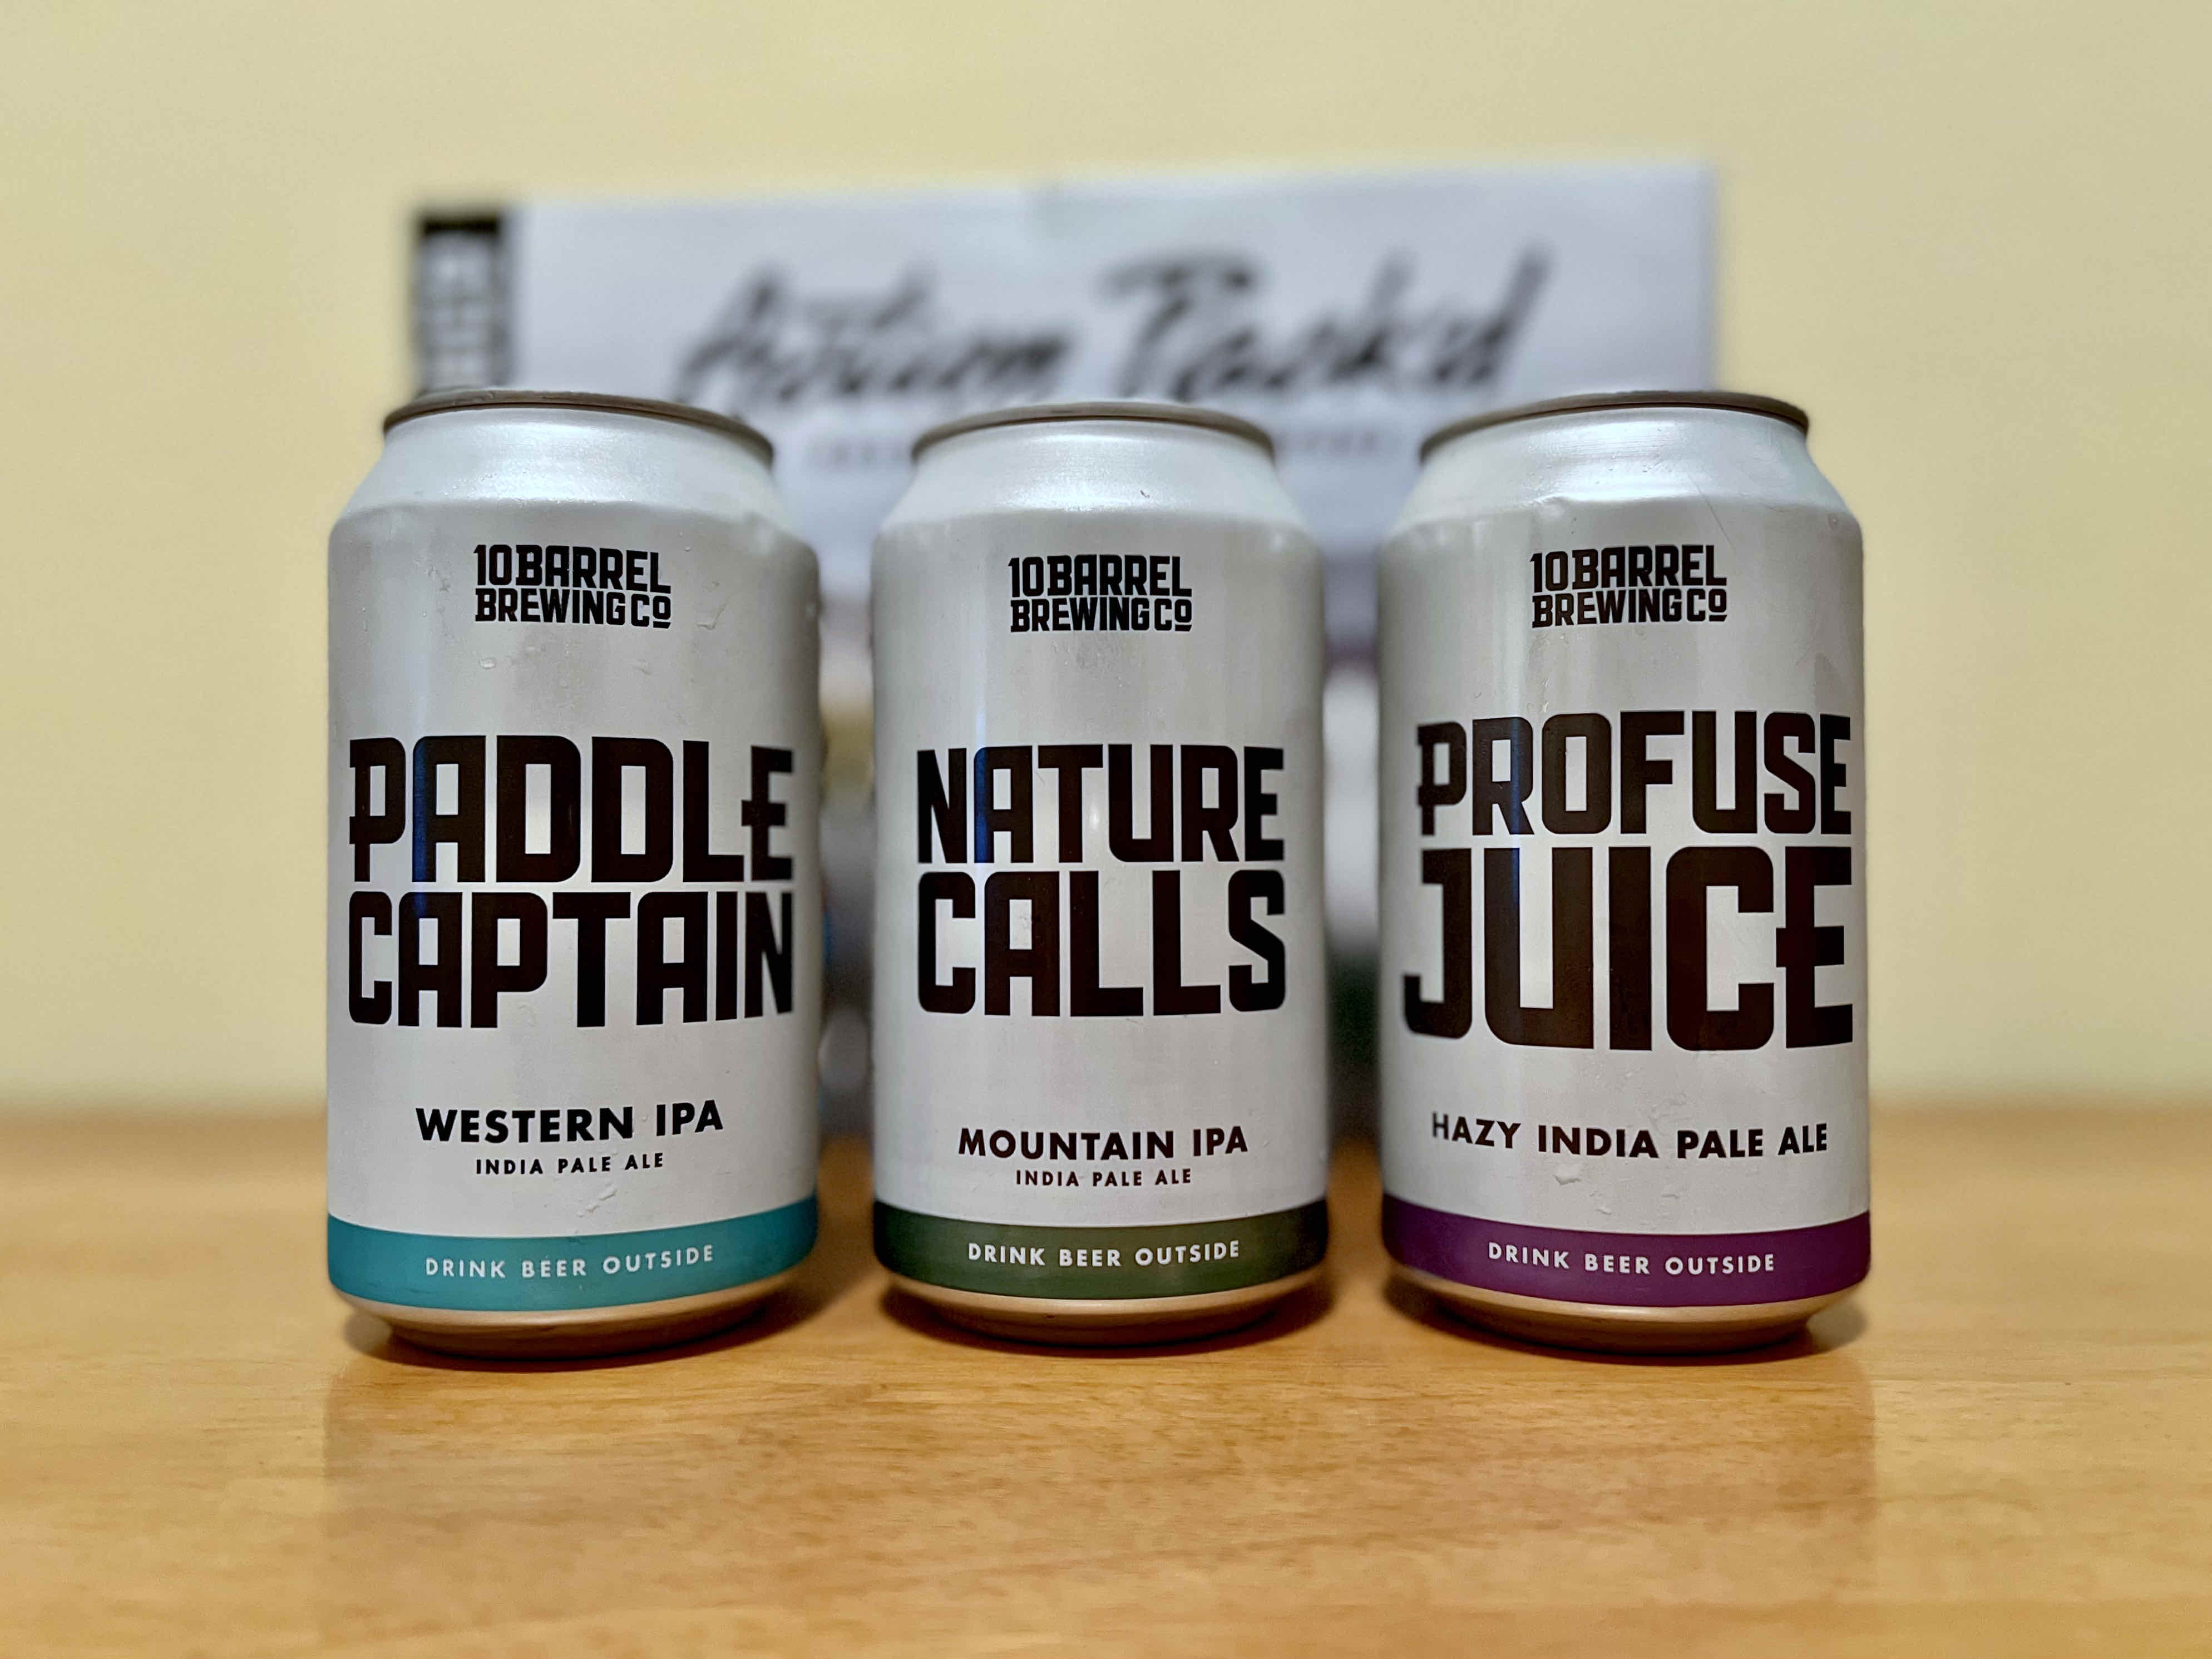 Paddle Captain, Nature Calls, and Profuse Juice are the three IPAs in the new Action Pack'd Variety 12 Pack from 10 Barrel Brewing.